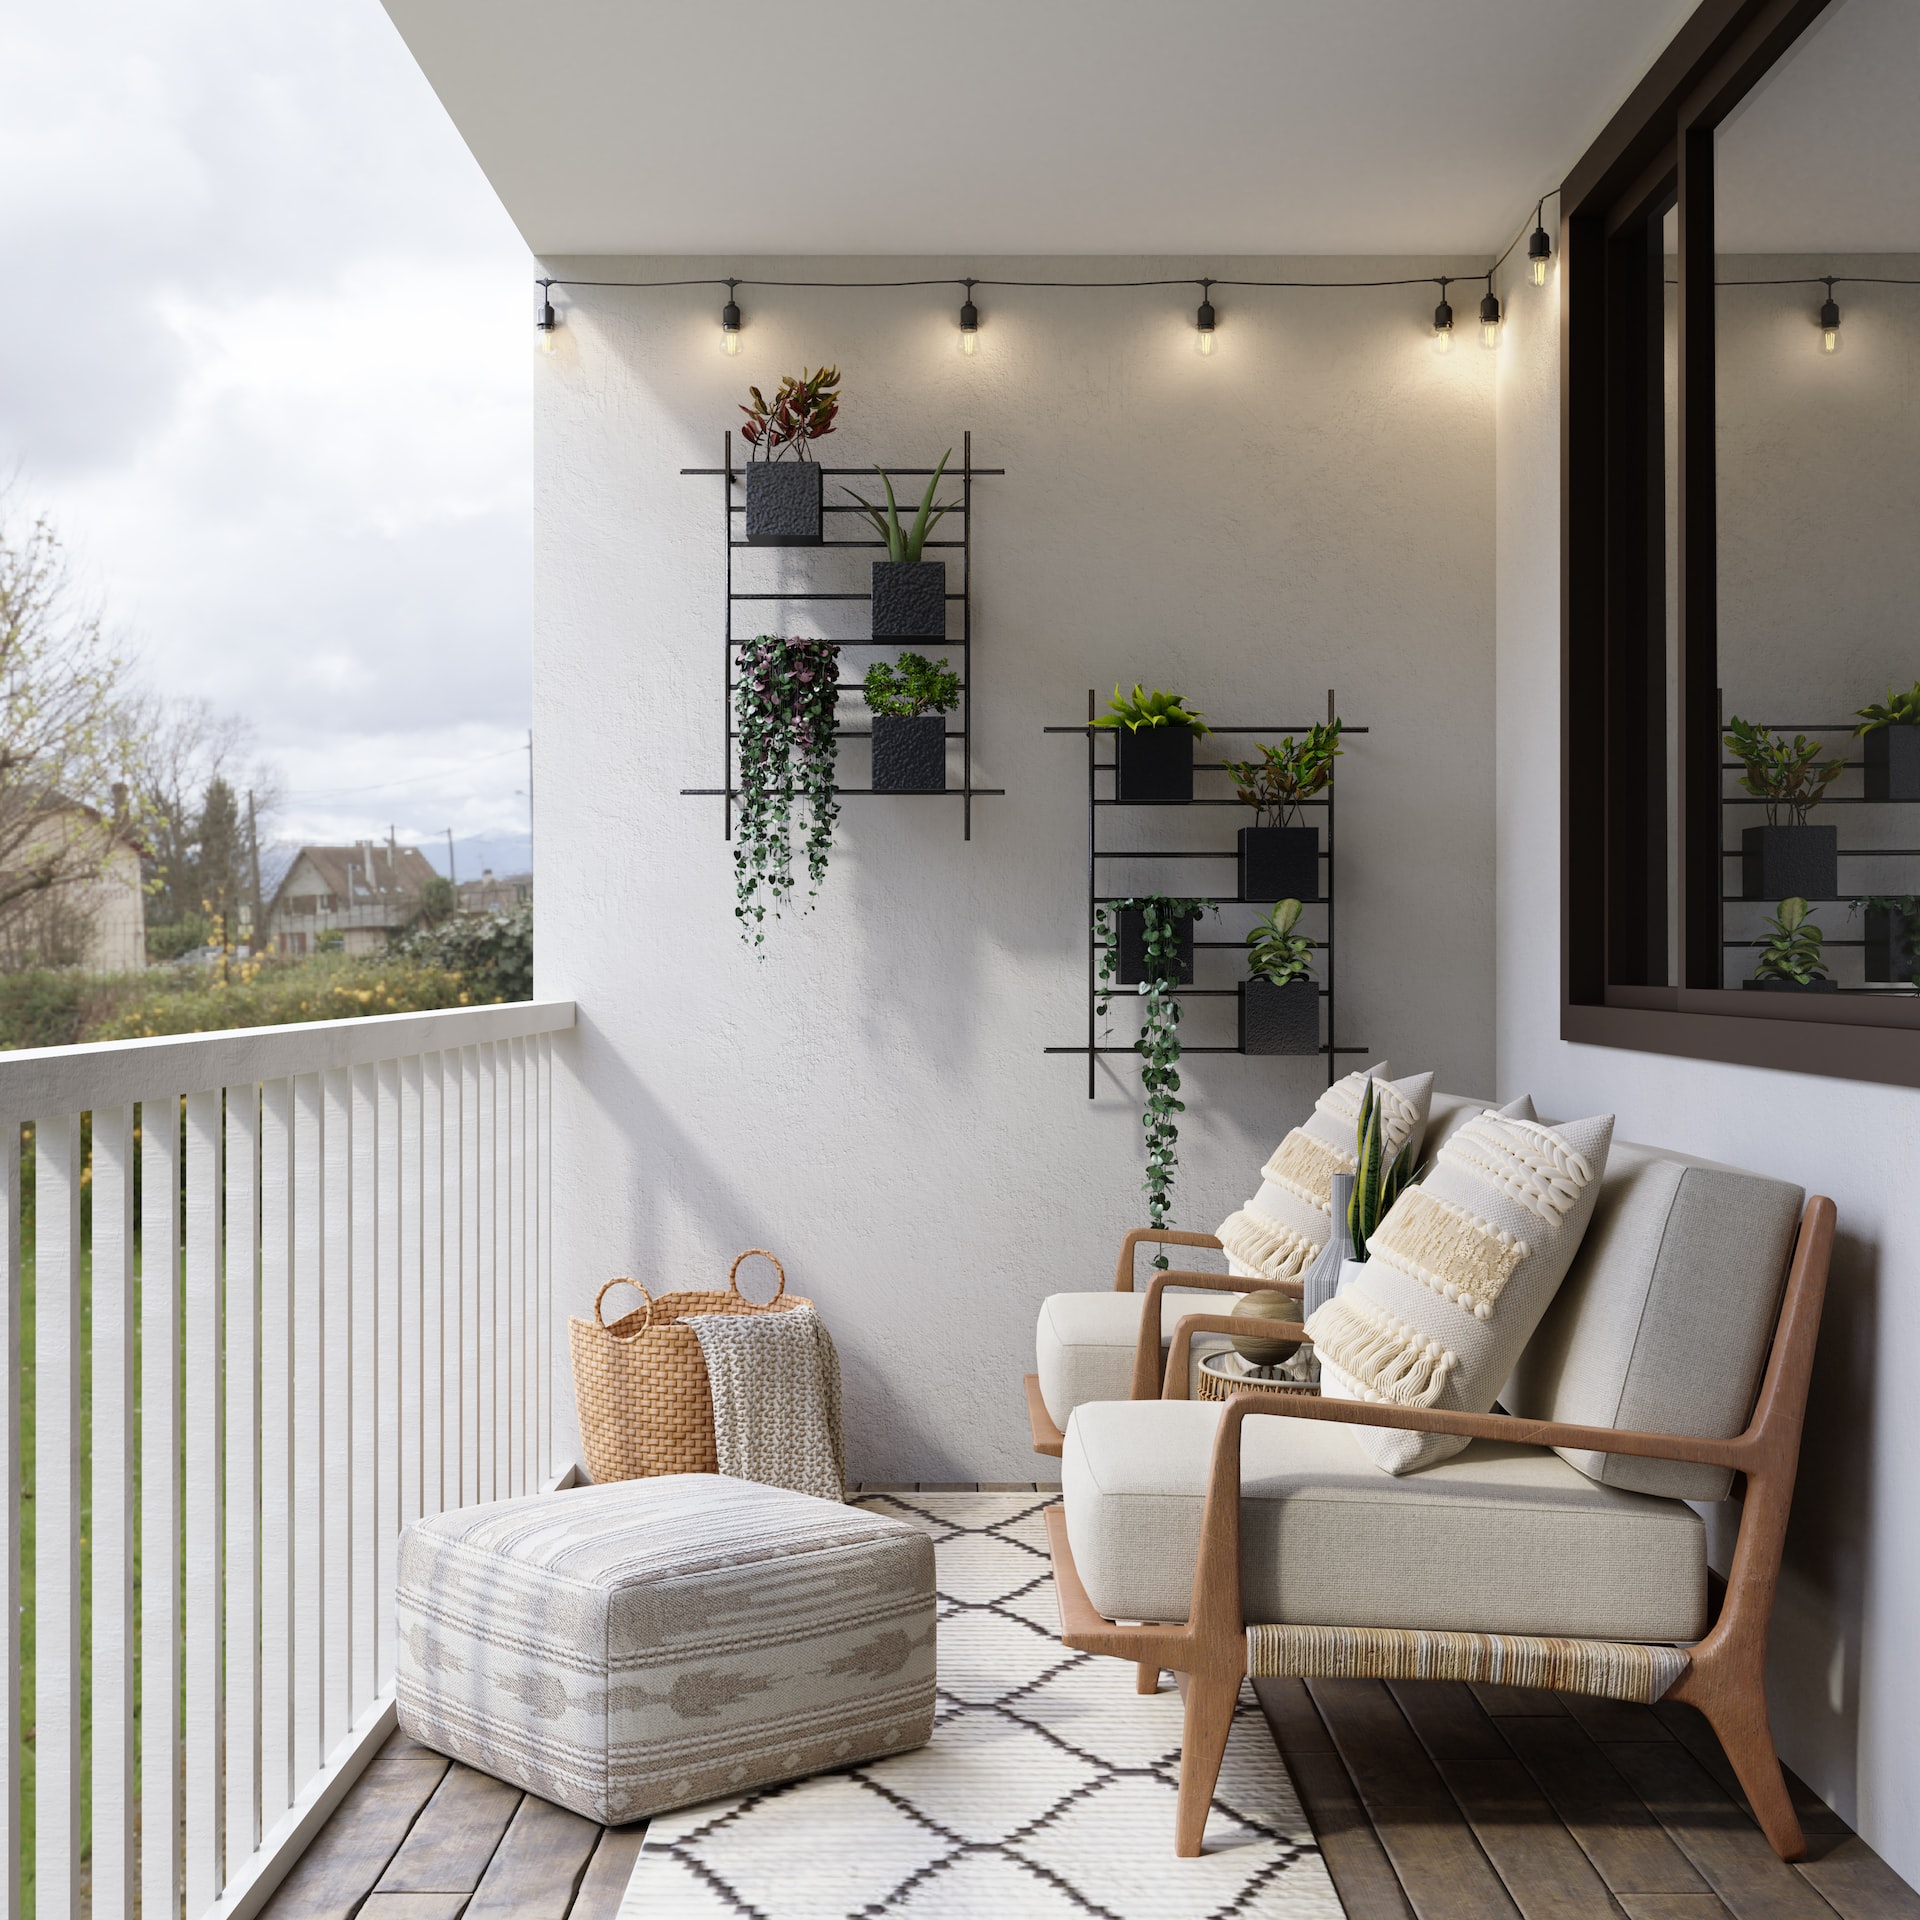 Outdoor Living: How to Upgrade Your Exterior Space